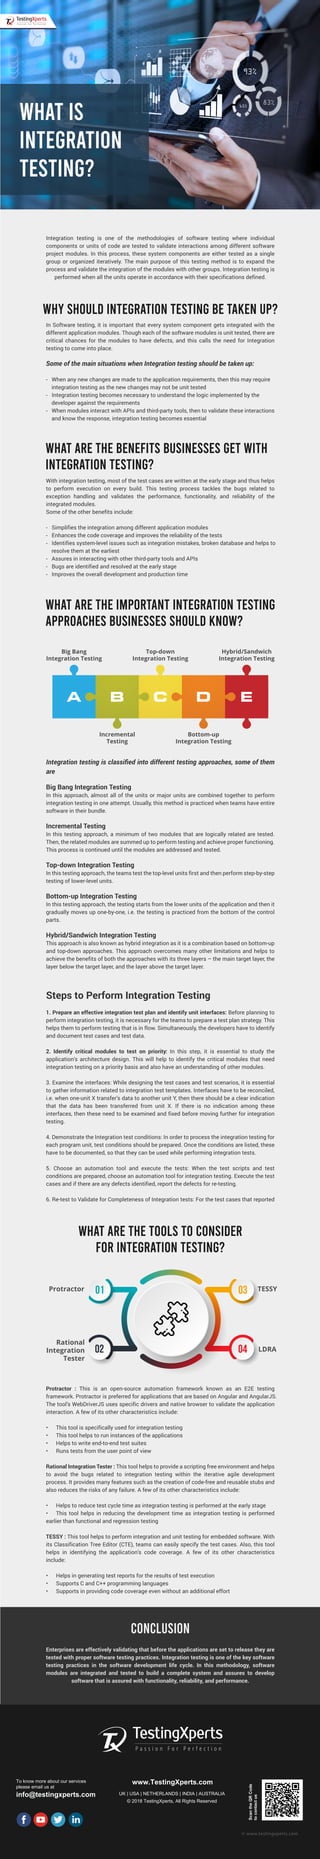 Integration testing is one of the methodologies of software testing where individual
components or units of code are tested to validate interactions among different software
project modules. In this process, these system components are either tested as a single
group or organized iteratively. The main purpose of this testing method is to expand the
process and validate the integration of the modules with other groups. Integration testing is
performed when all the units operate in accordance with their specifications defined.
In Software testing, it is important that every system component gets integrated with the
different application modules. Though each of the software modules is unit tested, there are
critical chances for the modules to have defects, and this calls the need for Integration
testing to come into place.
Some of the main situations when Integration testing should be taken up:
- When any new changes are made to the application requirements, then this may require
integration testing as the new changes may not be unit tested
- Integration testing becomes necessary to understand the logic implemented by the
developer against the requirements
- When modules interact with APIs and third-party tools, then to validate these interactions
and know the response, integration testing becomes essential
To know more about our services
please email us at
info@testingxperts.com
www.TestingXperts.com
UK | USA | NETHERLANDS | INDIA | AUSTRALIA
© 2018 TestingXperts, All Rights Reserved
ScantheQRCode
tocontactus
© www.testingxperts.com
WHY SHOULD INTEGRATION TESTING BE TAKEN UP?
With integration testing, most of the test cases are written at the early stage and thus helps
to perform execution on every build. This testing process tackles the bugs related to
exception handling and validates the performance, functionality, and reliability of the
integrated modules.
Some of the other benefits include:
- Simplifies the integration among different application modules
- Enhances the code coverage and improves the reliability of the tests
- Identifies system-level issues such as integration mistakes, broken database and helps to
resolve them at the earliest
- Assures in interacting with other third-party tools and APIs
- Bugs are identified and resolved at the early stage
- Improves the overall development and production time
Integration testing is classiﬁed into different testing approaches, some of them
are
Big Bang Integration Testing
In this approach, almost all of the units or major units are combined together to perform
integration testing in one attempt. Usually, this method is practiced when teams have entire
software in their bundle.
Incremental Testing
In this testing approach, a minimum of two modules that are logically related are tested.
Then, the related modules are summed up to perform testing and achieve proper functioning.
This process is continued until the modules are addressed and tested.
Top-down Integration Testing
In this testing approach, the teams test the top-level units first and then perform step-by-step
testing of lower-level units.
Bottom-up Integration Testing
In this testing approach, the testing starts from the lower units of the application and then it
gradually moves up one-by-one, i.e. the testing is practiced from the bottom of the control
parts.
Hybrid/Sandwich Integration Testing
This approach is also known as hybrid integration as it is a combination based on bottom-up
and top-down approaches. This approach overcomes many other limitations and helps to
achieve the benefits of both the approaches with its three layers – the main target layer, the
layer below the target layer, and the layer above the target layer.
Steps to Perform Integration Testing
1. Prepare an effective integration test plan and identify unit interfaces: Before planning to
perform integration testing, it is necessary for the teams to prepare a test plan strategy. This
helps them to perform testing that is in flow. Simultaneously, the developers have to identify
and document test cases and test data.
2. Identify critical modules to test on priority: In this step, it is essential to study the
application’s architecture design. This will help to identify the critical modules that need
integration testing on a priority basis and also have an understanding of other modules.
3. Examine the interfaces: While designing the test cases and test scenarios, it is essential
to gather information related to integration test templates. Interfaces have to be reconciled,
i.e. when one-unit X transfer’s data to another unit Y, then there should be a clear indication
that the data has been transferred from unit X. If there is no indication among these
interfaces, then these need to be examined and fixed before moving further for integration
testing.
4. Demonstrate the Integration test conditions: In order to process the integration testing for
each program unit, test conditions should be prepared. Once the conditions are listed, these
have to be documented, so that they can be used while performing integration tests.
5. Choose an automation tool and execute the tests: When the test scripts and test
conditions are prepared, choose an automation tool for integration testing. Execute the test
cases and if there are any defects identified, report the defects for re-testing.
6. Re-test to Validate for Completeness of Integration tests: For the test cases that reported
Protractor : This is an open-source automation framework known as an E2E testing
framework. Protractor is preferred for applications that are based on Angular and AngularJS.
The tool’s WebDriverJS uses specific drivers and native browser to validate the application
interaction. A few of its other characteristics include:
• This tool is specifically used for integration testing
• This tool helps to run instances of the applications
• Helps to write end-to-end test suites
• Runs tests from the user point of view
Rational Integration Tester : This tool helps to provide a scripting free environment and helps
to avoid the bugs related to integration testing within the iterative agile development
process. It provides many features such as the creation of code-free and reusable stubs and
also reduces the risks of any failure. A few of its other characteristics include:
• Helps to reduce test cycle time as integration testing is performed at the early stage
• This tool helps in reducing the development time as integration testing is performed
earlier than functional and regression testing
TESSY : This tool helps to perform integration and unit testing for embedded software. With
its Classification Tree Editor (CTE), teams can easily specify the test cases. Also, this tool
helps in identifying the application’s code coverage. A few of its other characteristics
include:
• Helps in generating test reports for the results of test execution
• Supports C and C++ programming languages
• Supports in providing code coverage even without an additional effort
WHAT ARE THE BENEFITS BUSINESSES GET WITH
INTEGRATION TESTING?
WHAT ARE THE IMPORTANT INTEGRATION TESTING
APPROACHES BUSINESSES SHOULD KNOW?
WHAT ARE THE TOOLS TO CONSIDER
FOR INTEGRATION TESTING?
WHAT IS
INTEGRATION
TESTING?
Big Bang
Integration Testing
Top-down
Integration Testing
Hybrid/Sandwich
Integration Testing
Incremental
Testing
Bottom-up
Integration Testing
Protractor TESSY
Rational
Integration
Tester
LDRA
CONCLUSION
Enterprises are effectively validating that before the applications are set to release they are
tested with proper software testing practices. Integration testing is one of the key software
testing practices in the software development life cycle. In this methodology, software
modules are integrated and tested to build a complete system and assures to develop
software that is assured with functionality, reliability, and performance.
 